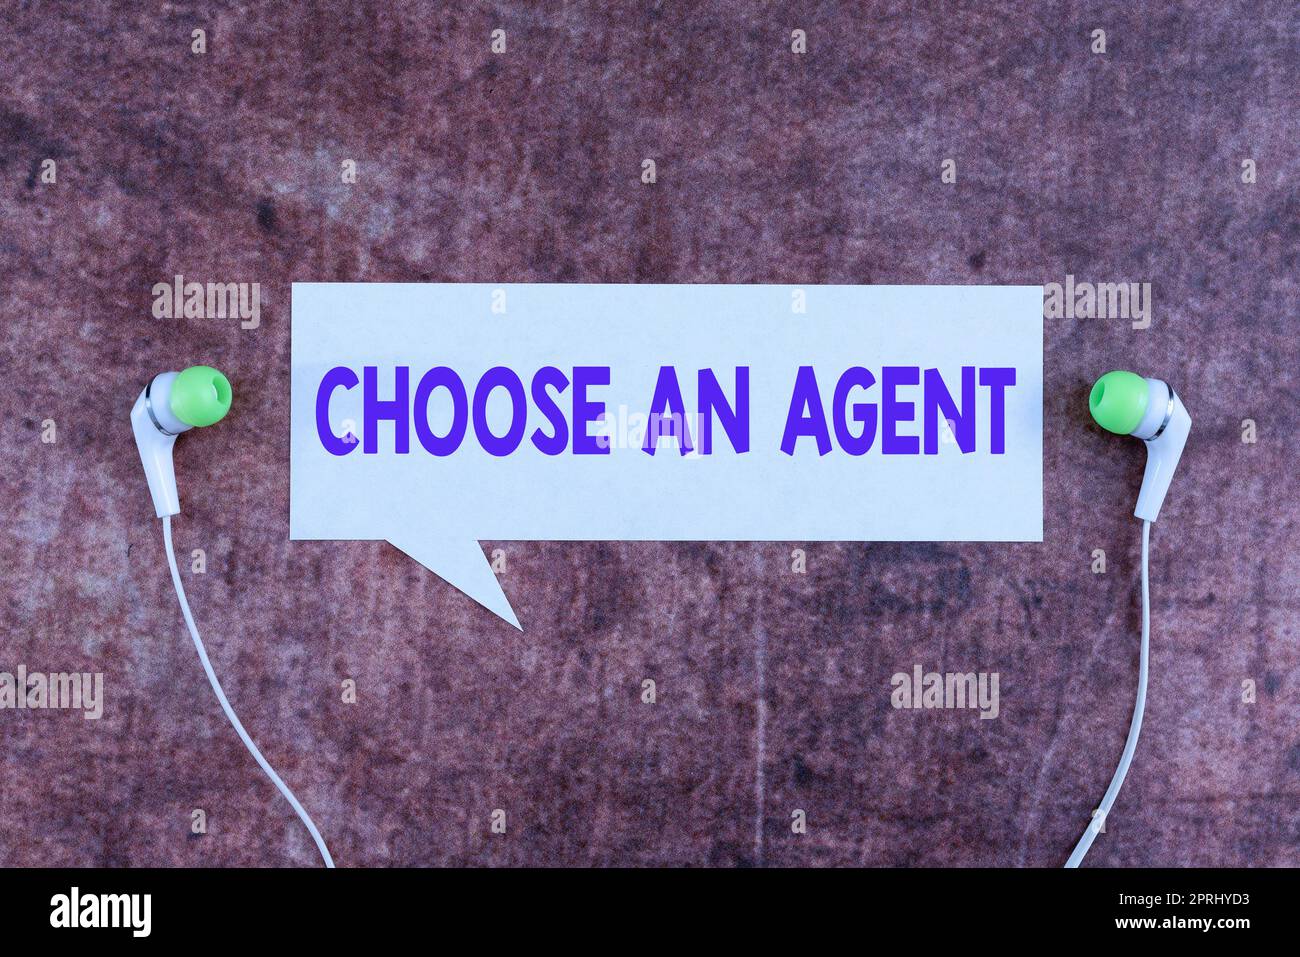 Writing displaying text Choose An AgentChoose someone who chooses decisions on behalf of you. Concept meaning Choose someone who chooses decisions on behalf of you Stock Photo